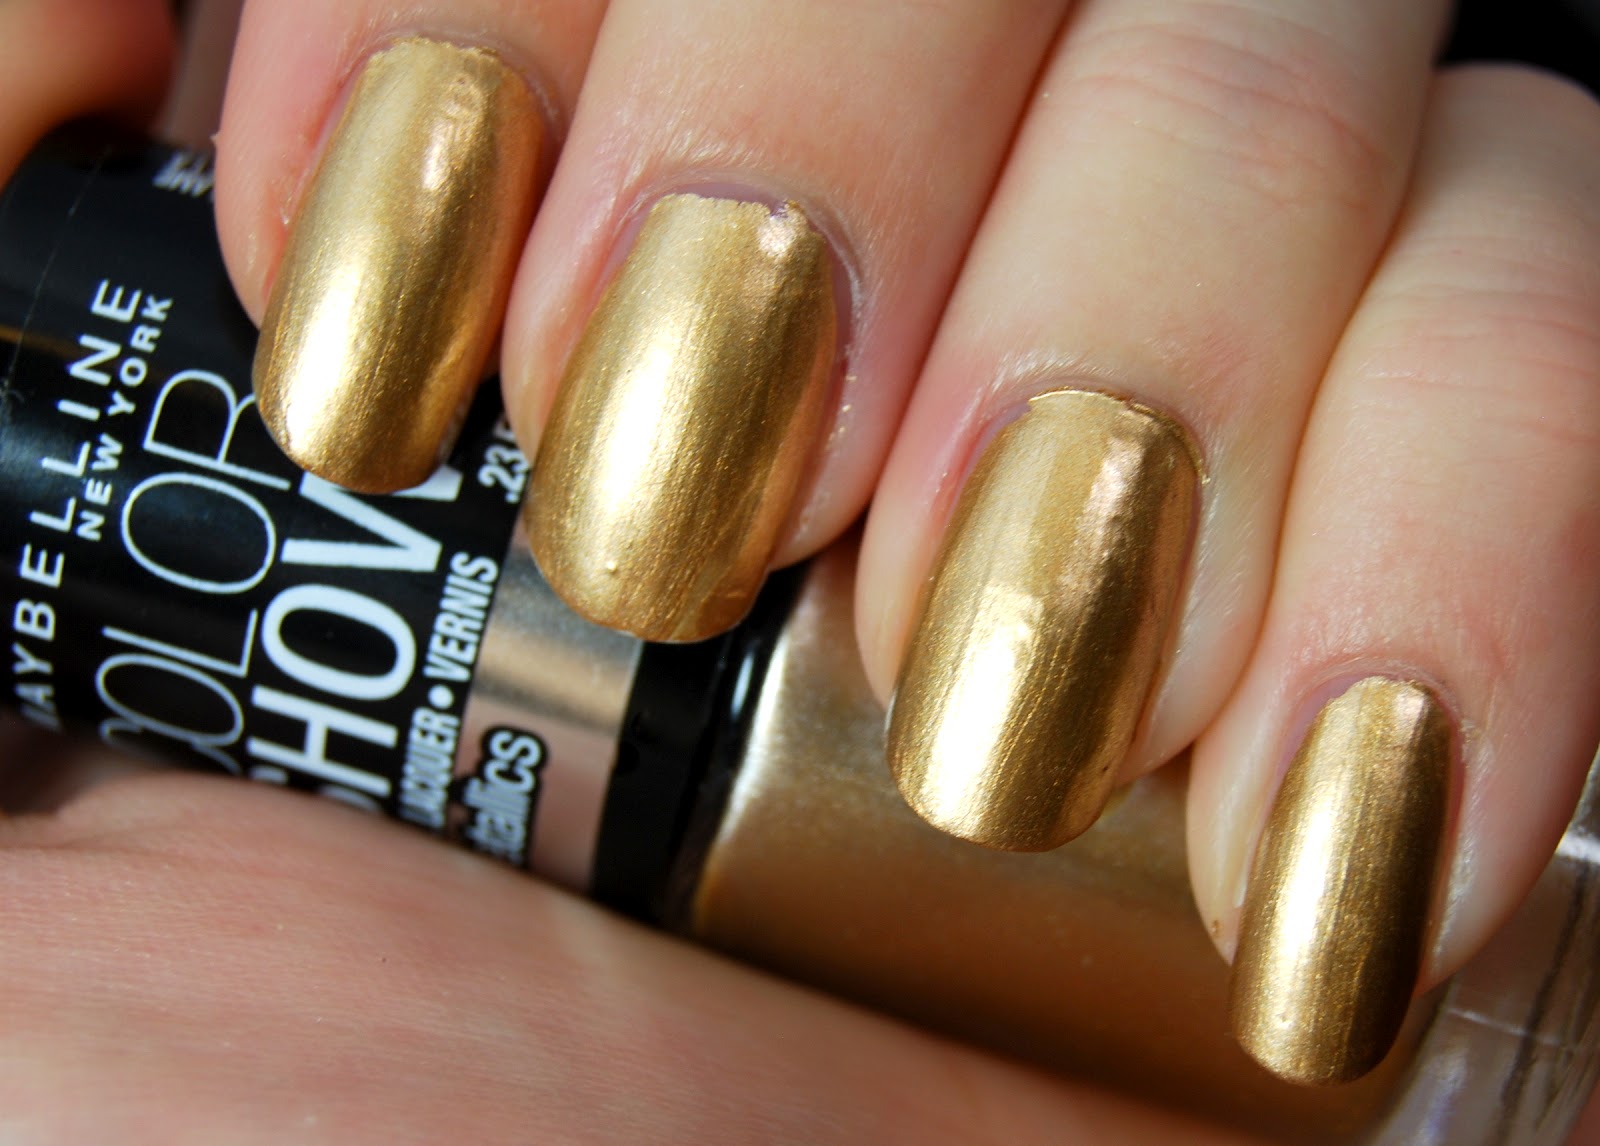 10. Sinful Colors Professional Nail Polish in "Gold Medal" - wide 6